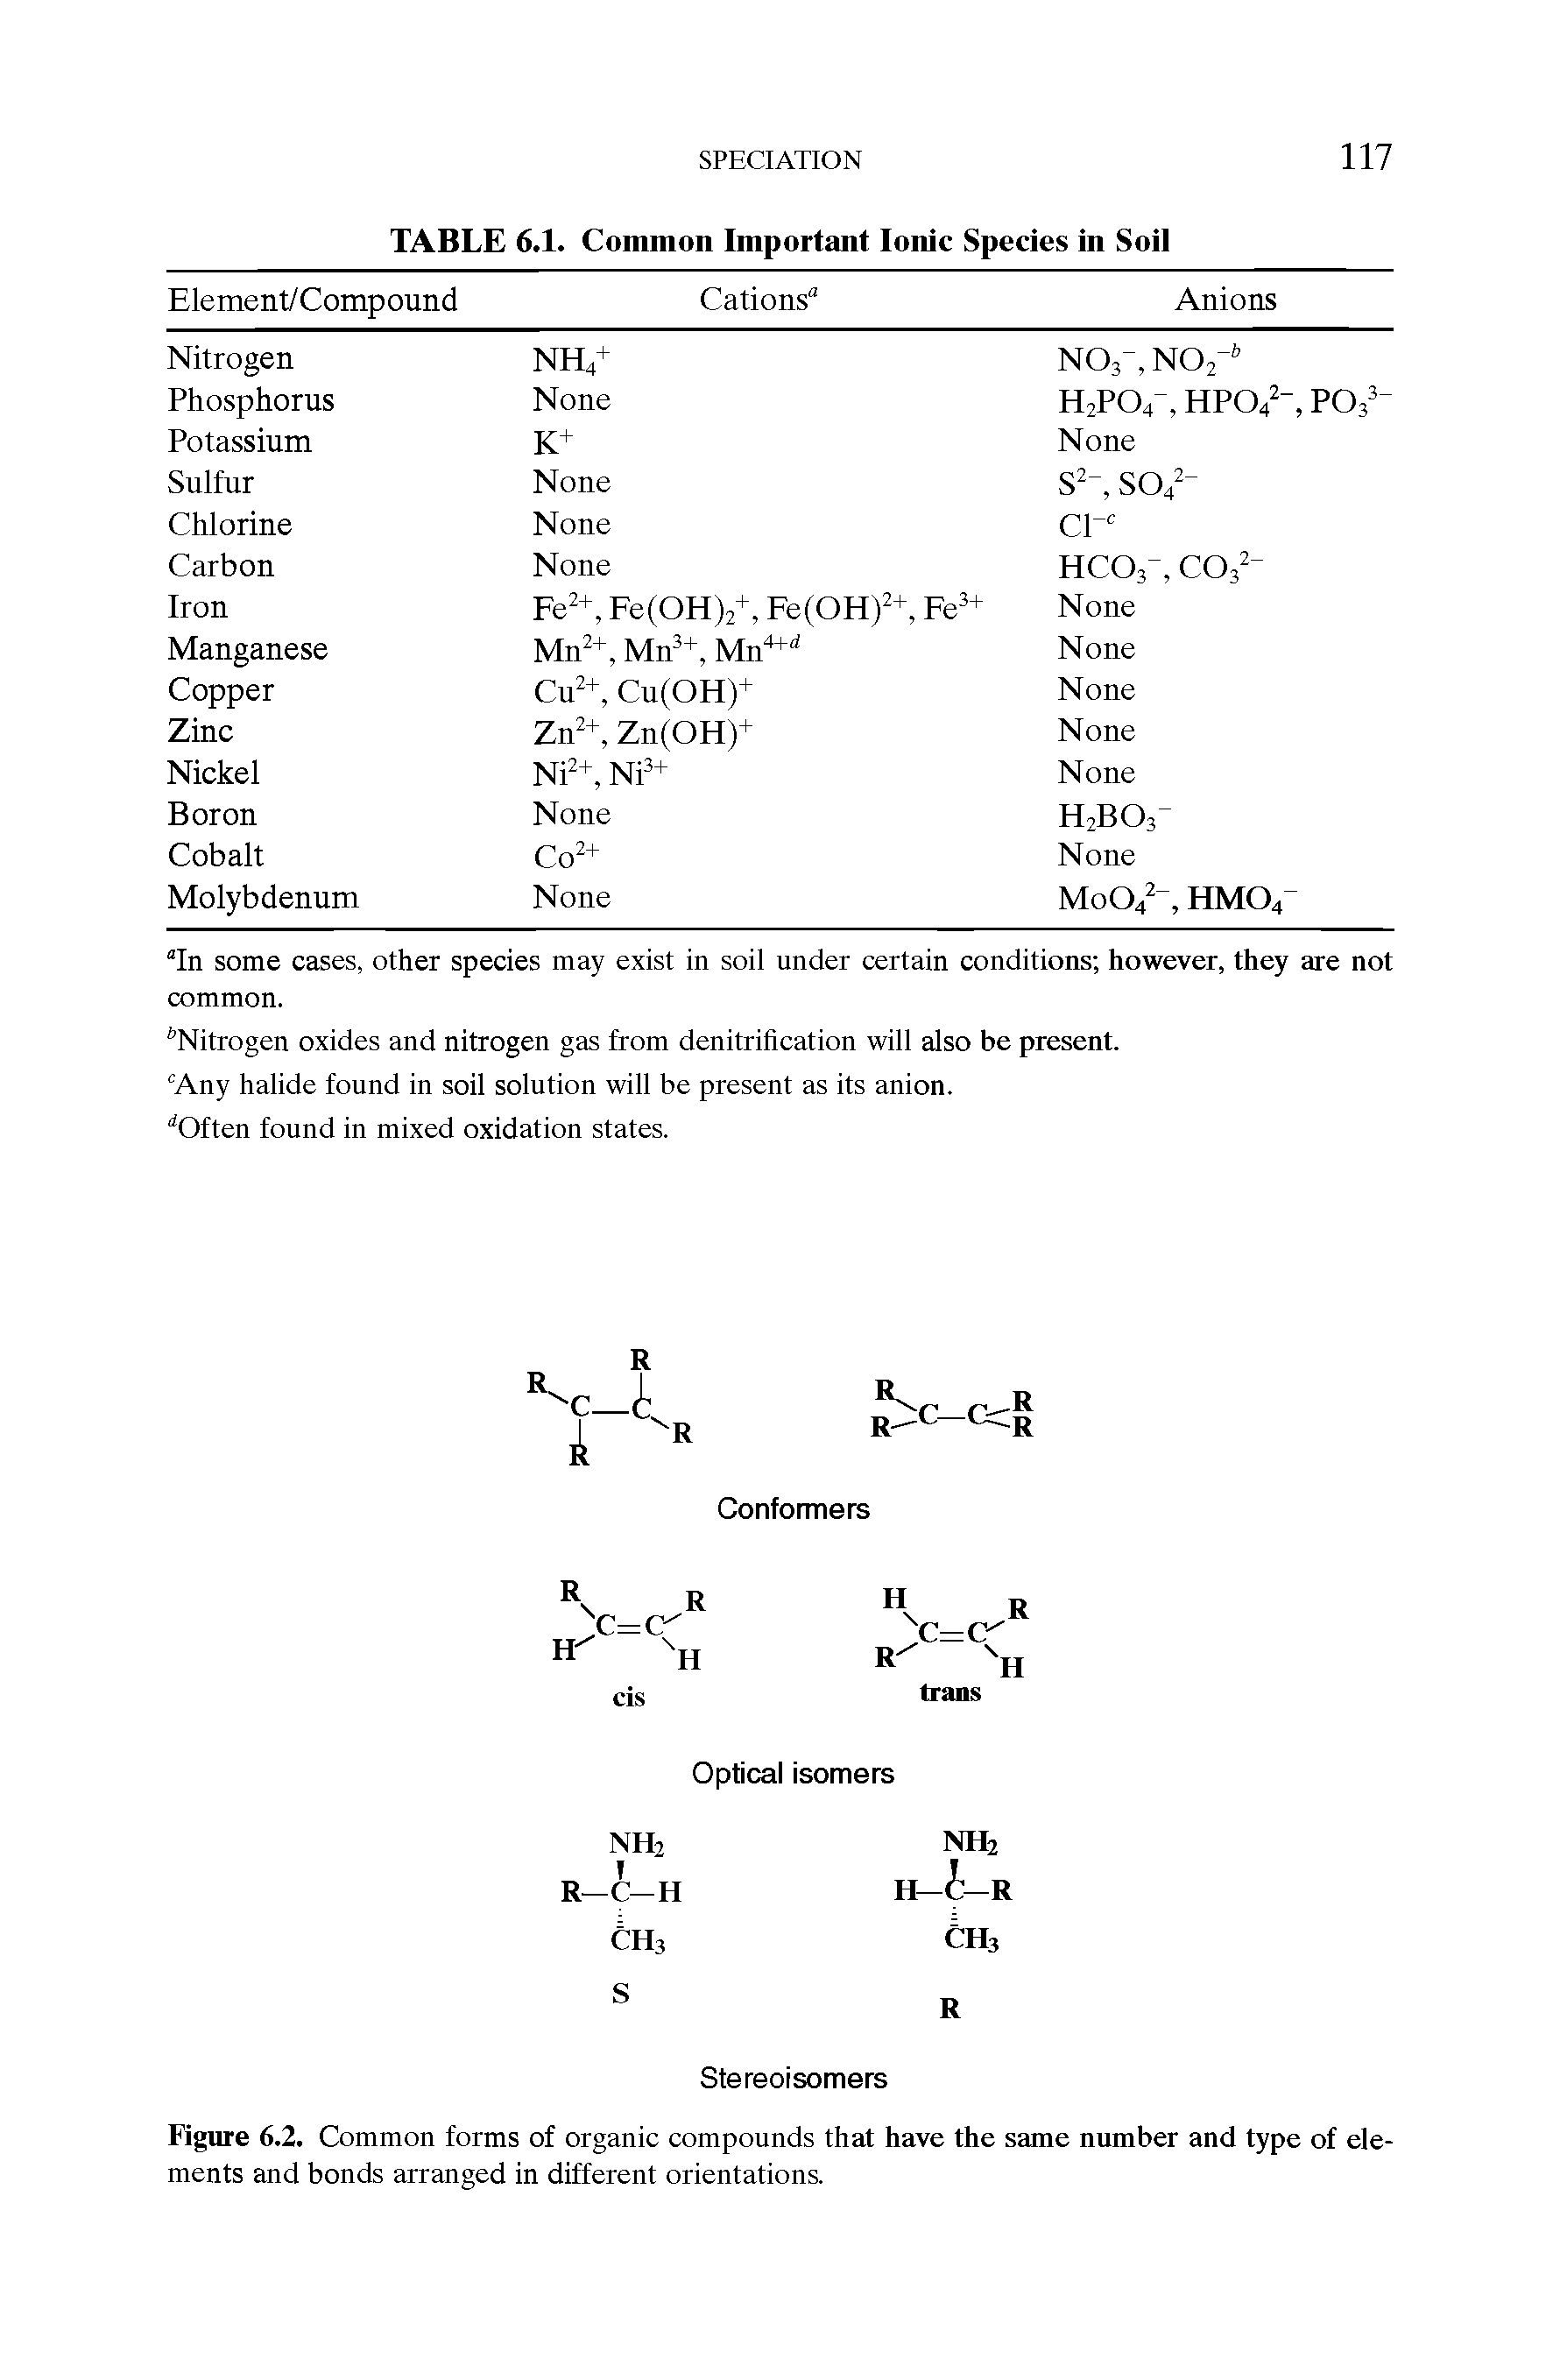 Figure 6.2. Common forms of organic compounds that have the same number and type of elements and bonds arranged in different orientations.